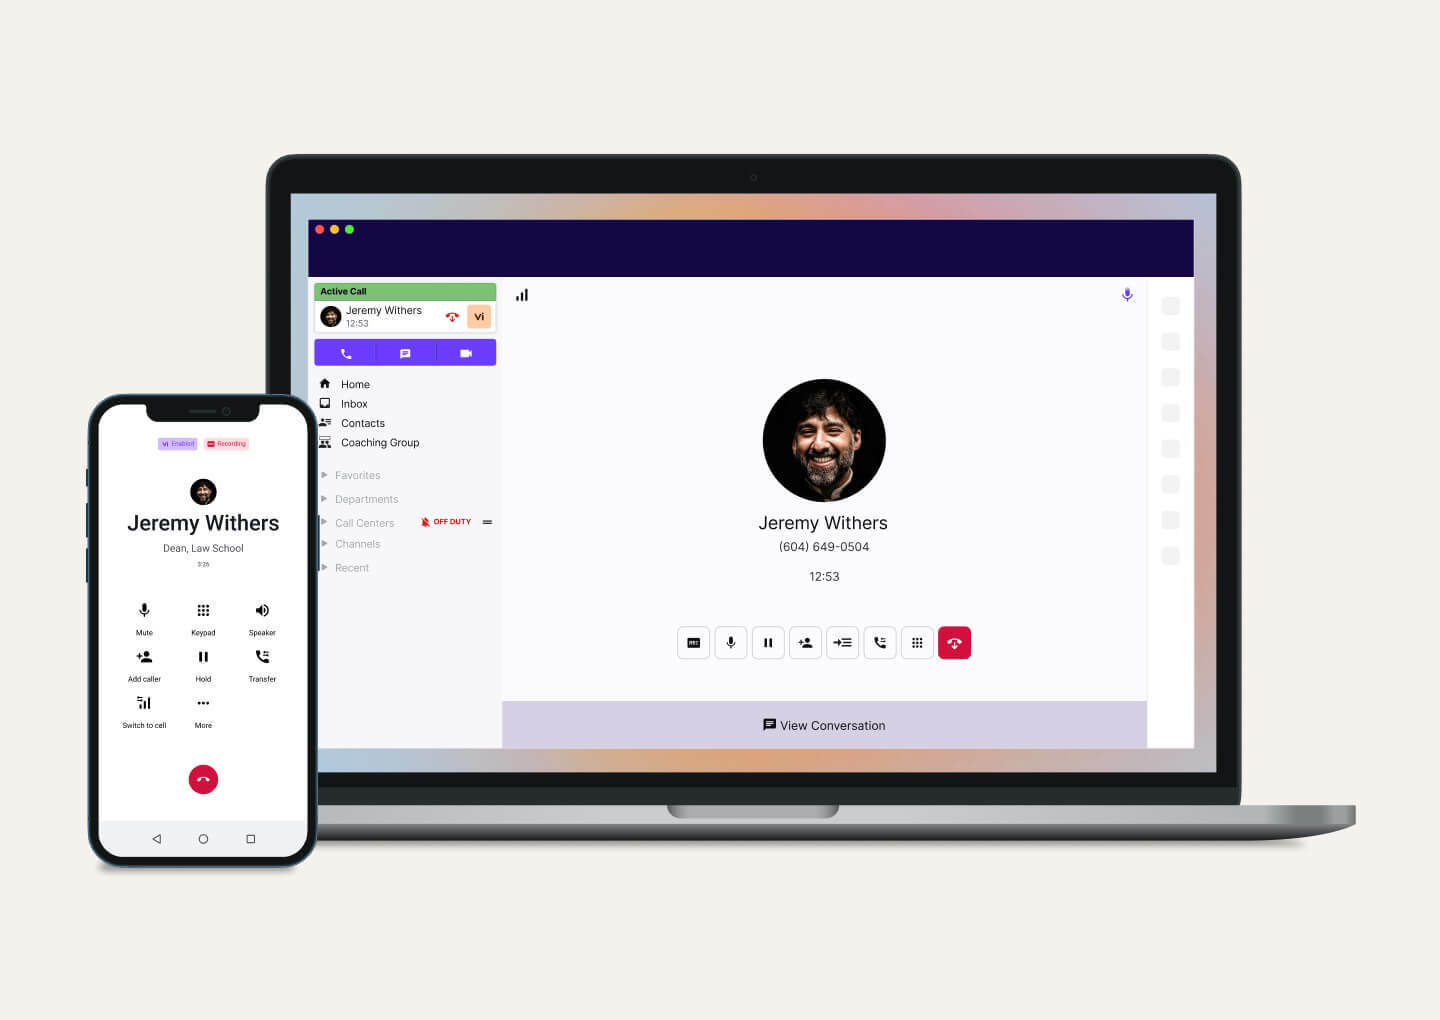 making phone calls from dialpad's desktop and mobile app